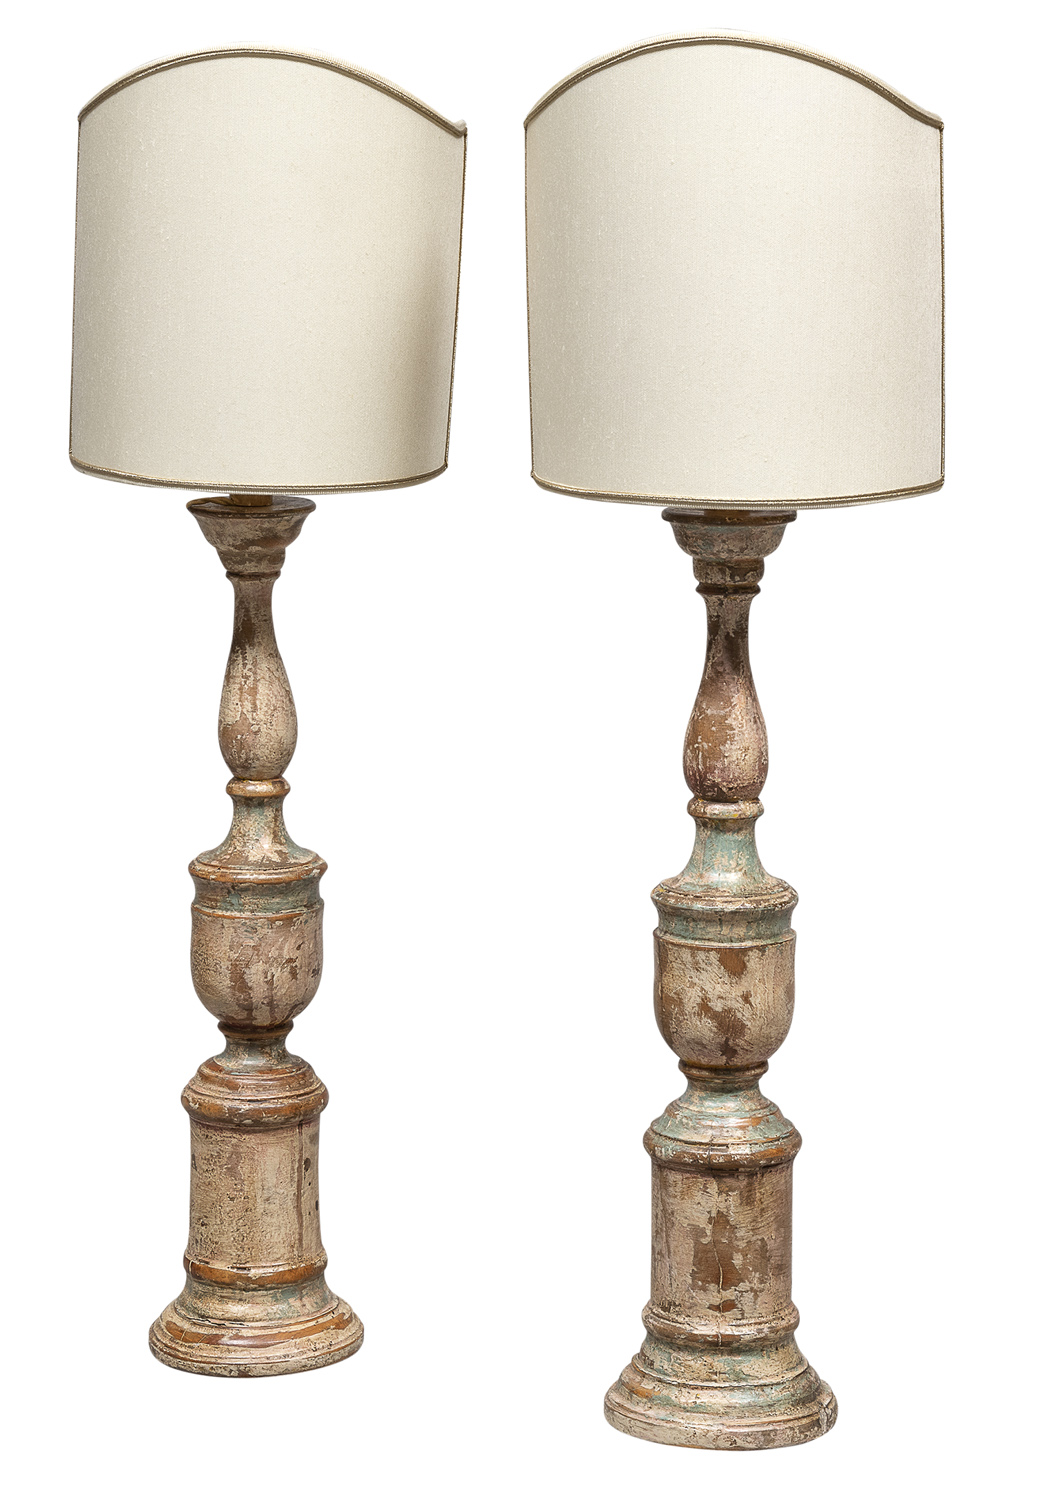 PAIR OF CANDLESTICKS IN LACQUERED WOOD 18TH CENTURY BRANDS